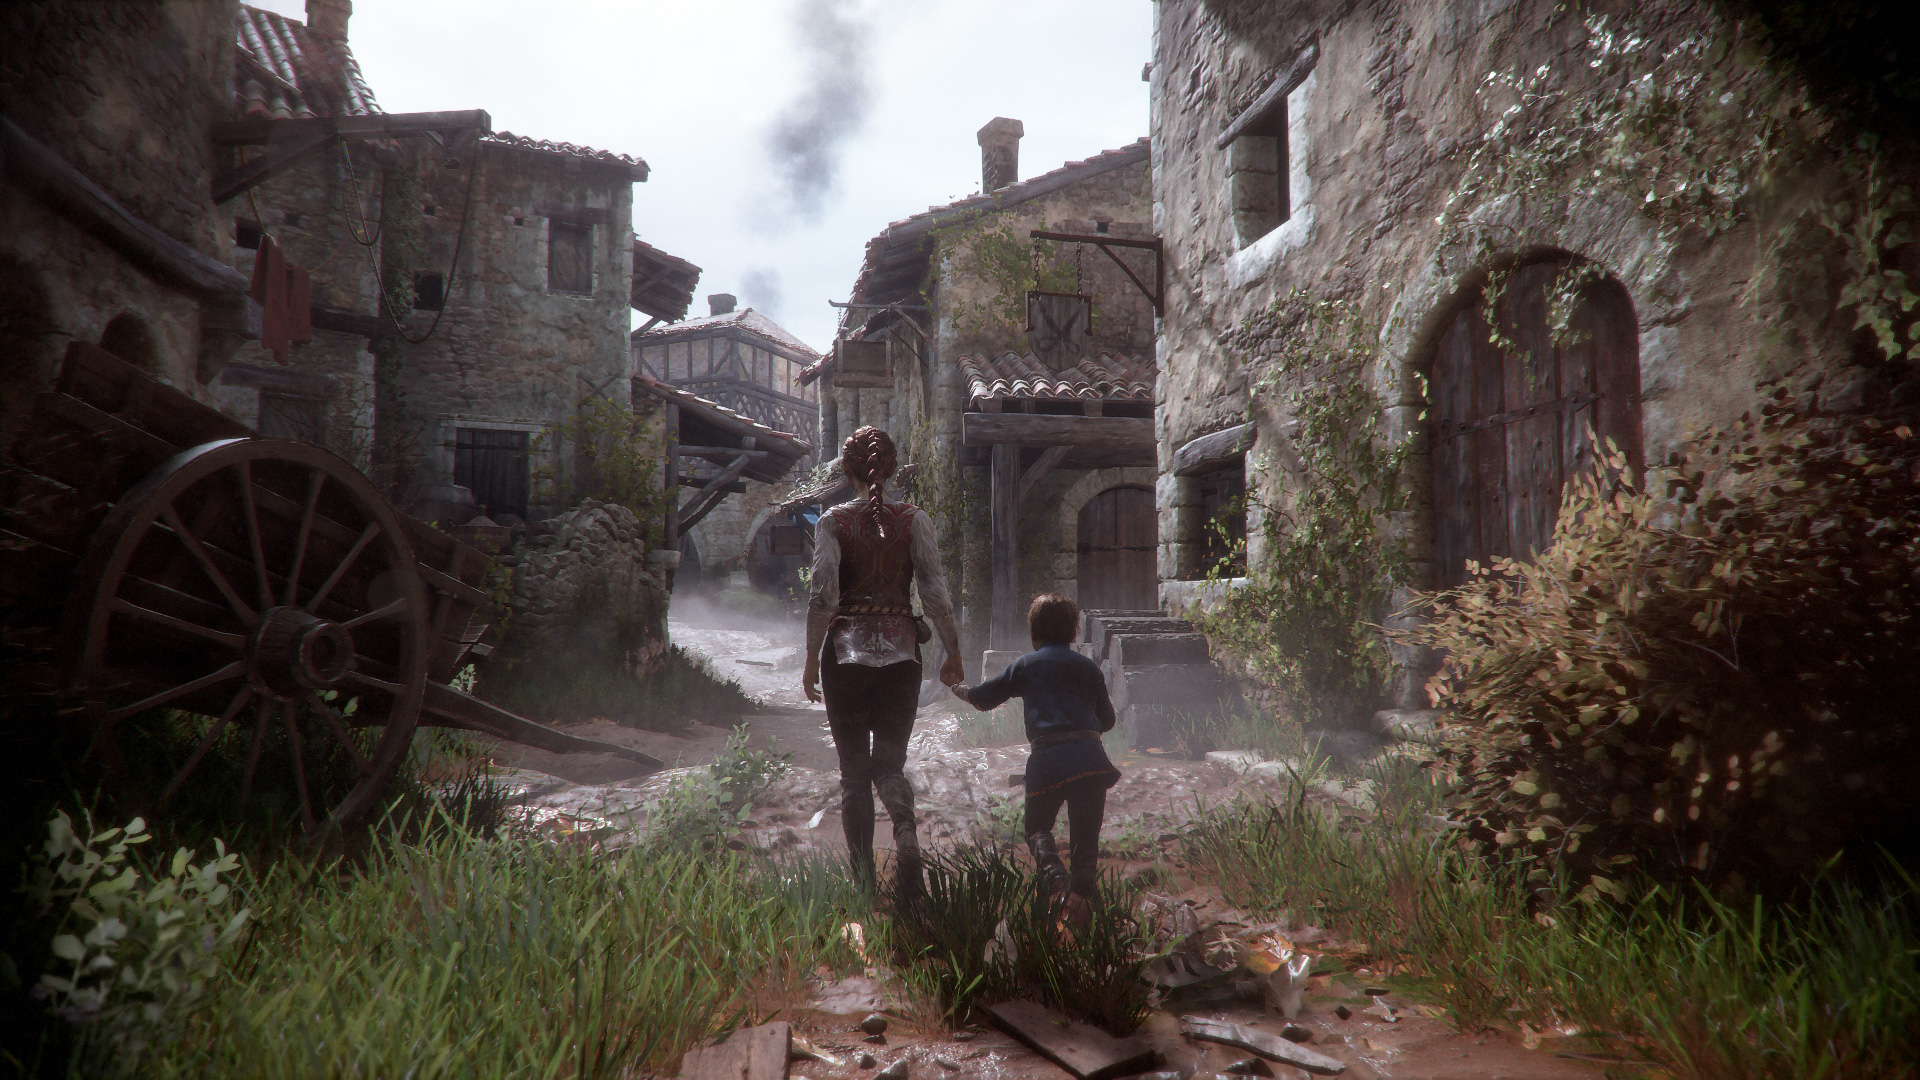 July 2021's PlayStation Plus games could include A Plague Tale